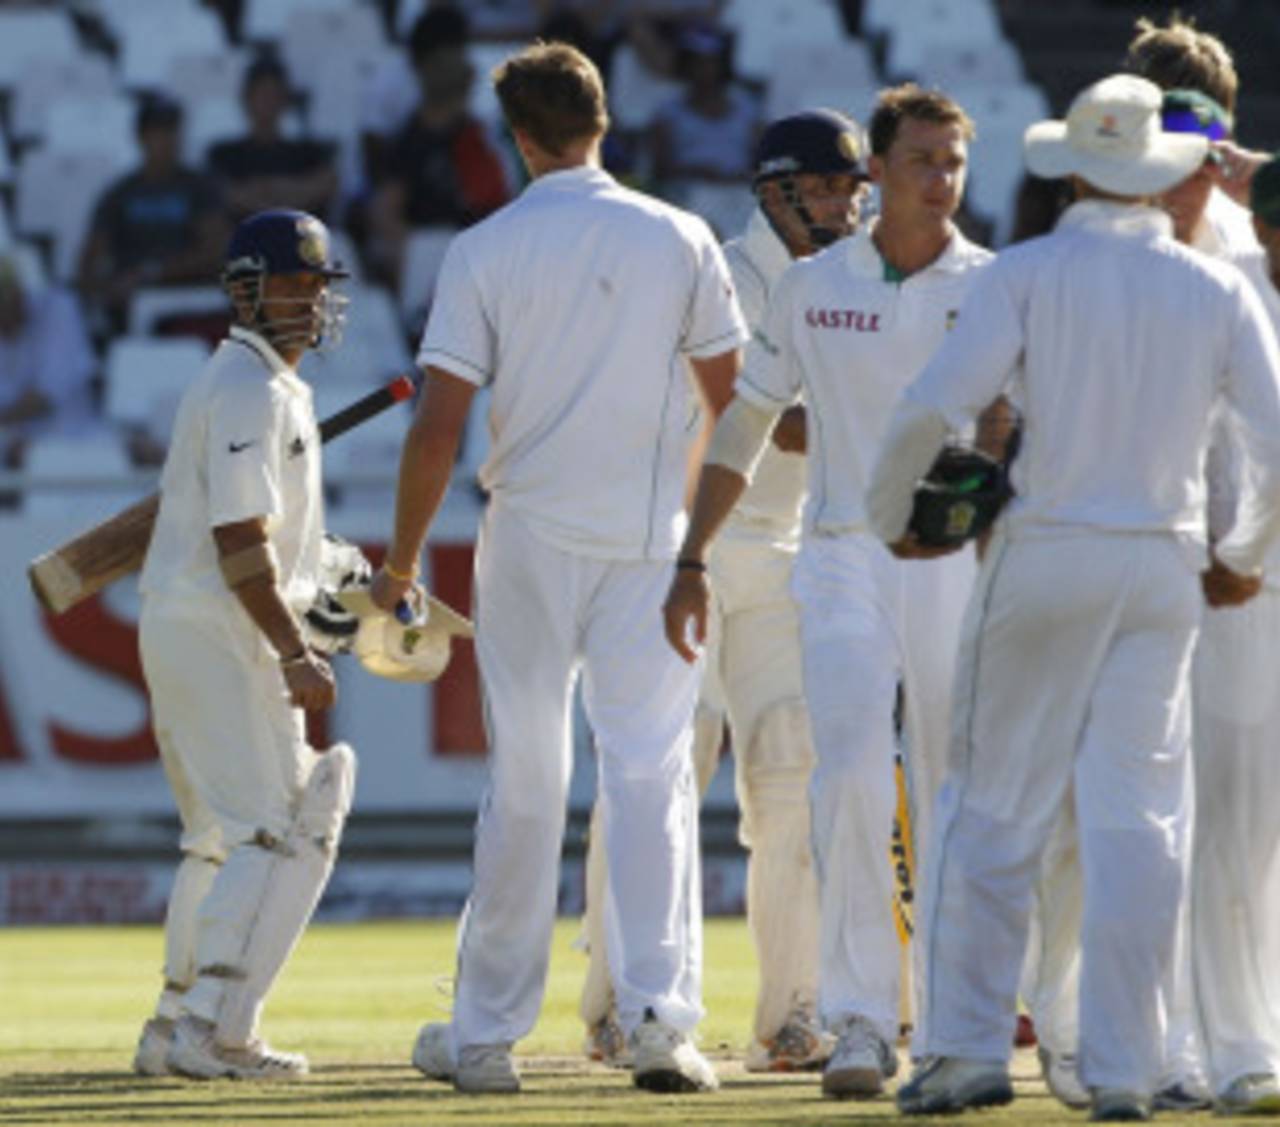 The players decide to go off, leaving the series tied 1-1, South Africa v India, 3rd Test, Cape Town, 5th day, January 6, 2011